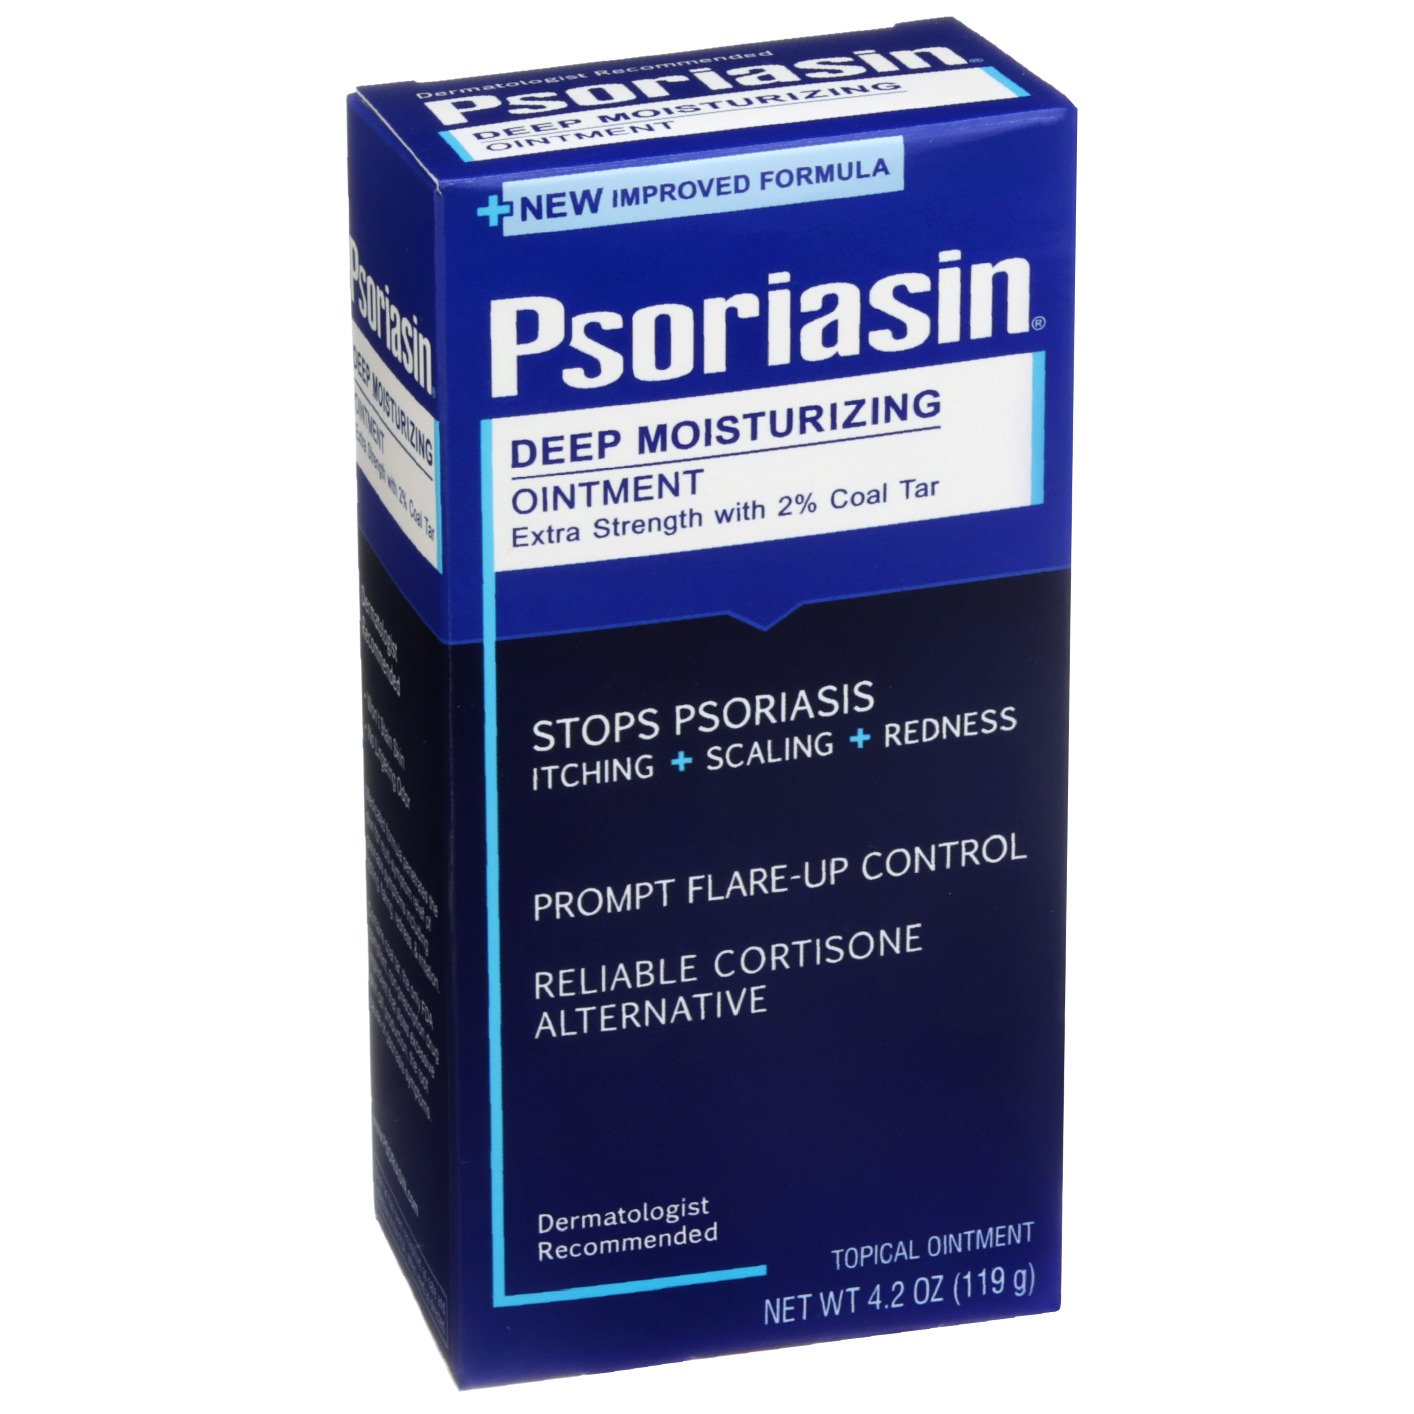 psoriasin ointment reviews)